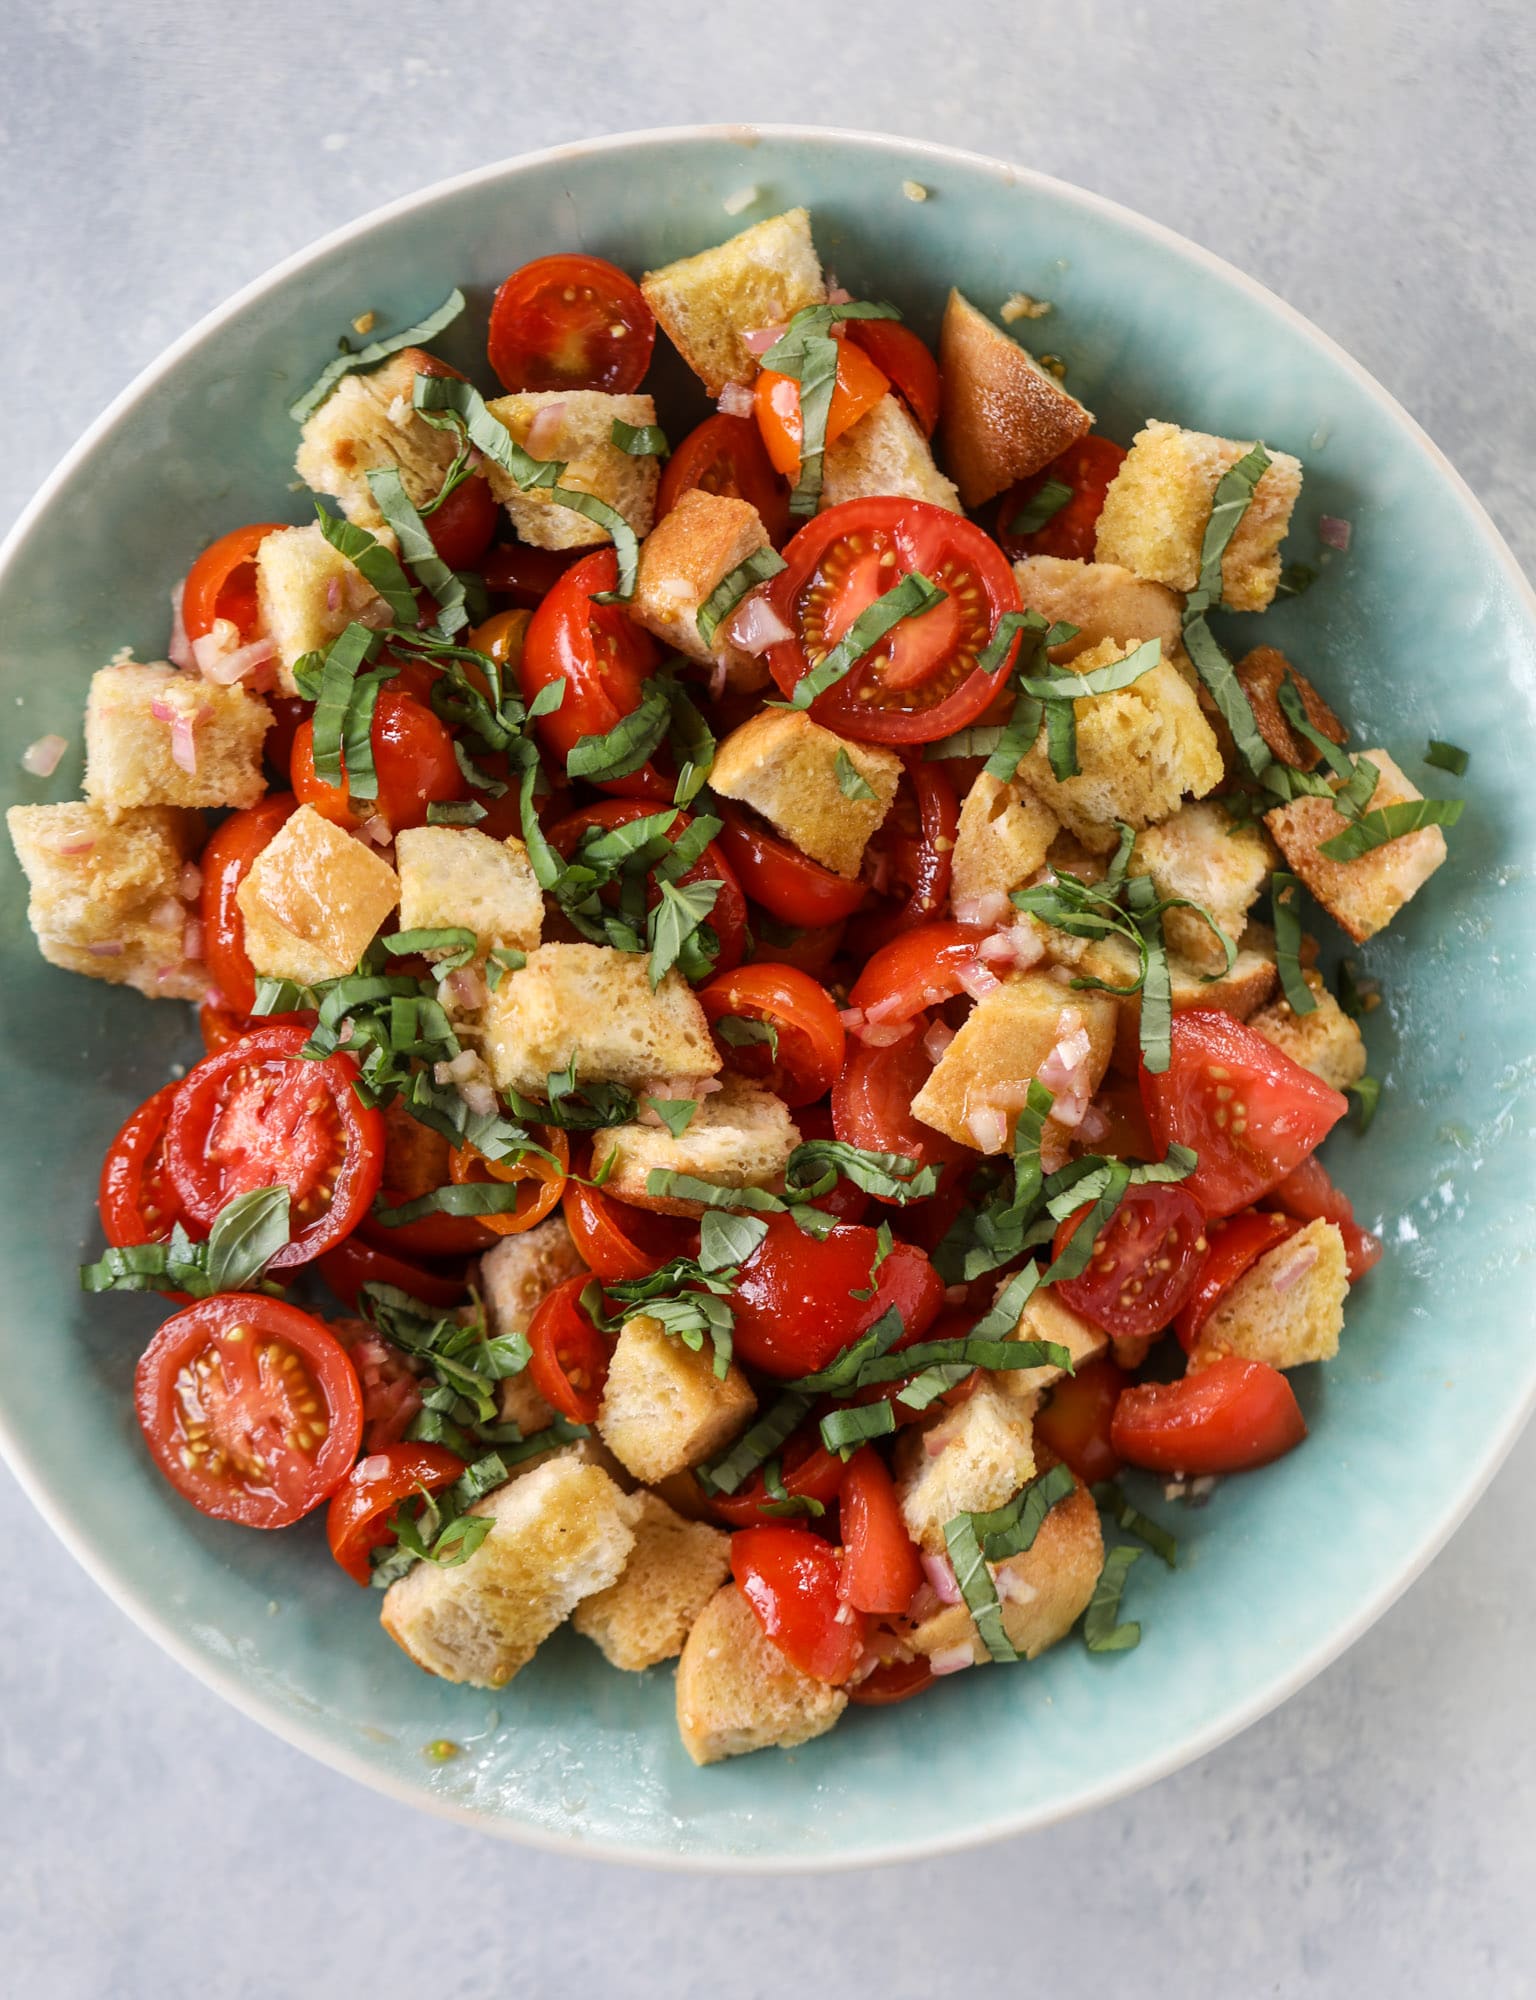 This is the perfect tomato panzanella salad! It's full of juicy, bursting, sweet tomatoes, toasted sourdough bread cubes, fresh herbs, grilled corn, sliced avocado and an incredible homemade dressing that blankets everything in deliciousness. SO good. I howsweeteats.com #panzanella #salad #tomato #basil #summer #corn #avocado #healthy #recipes